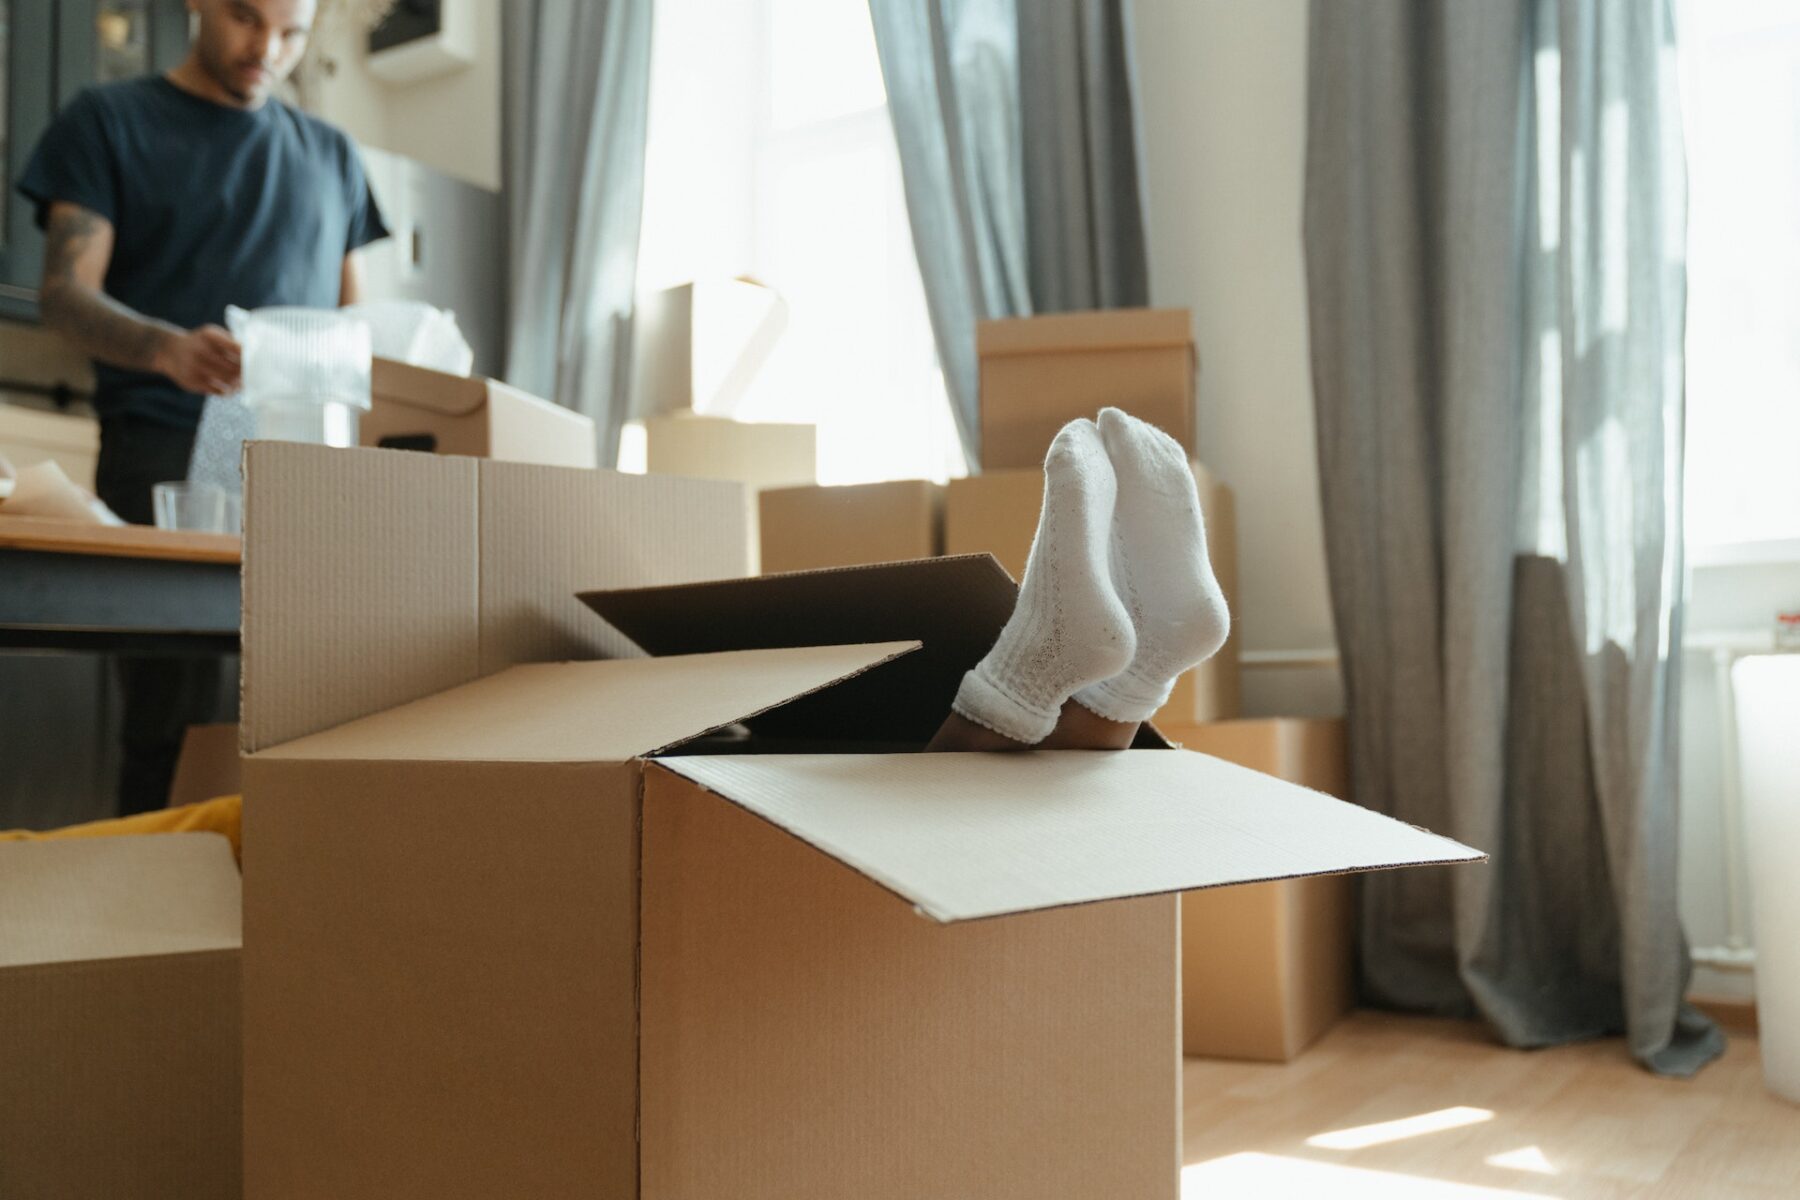 6 Things To Do When Moving Into A New House